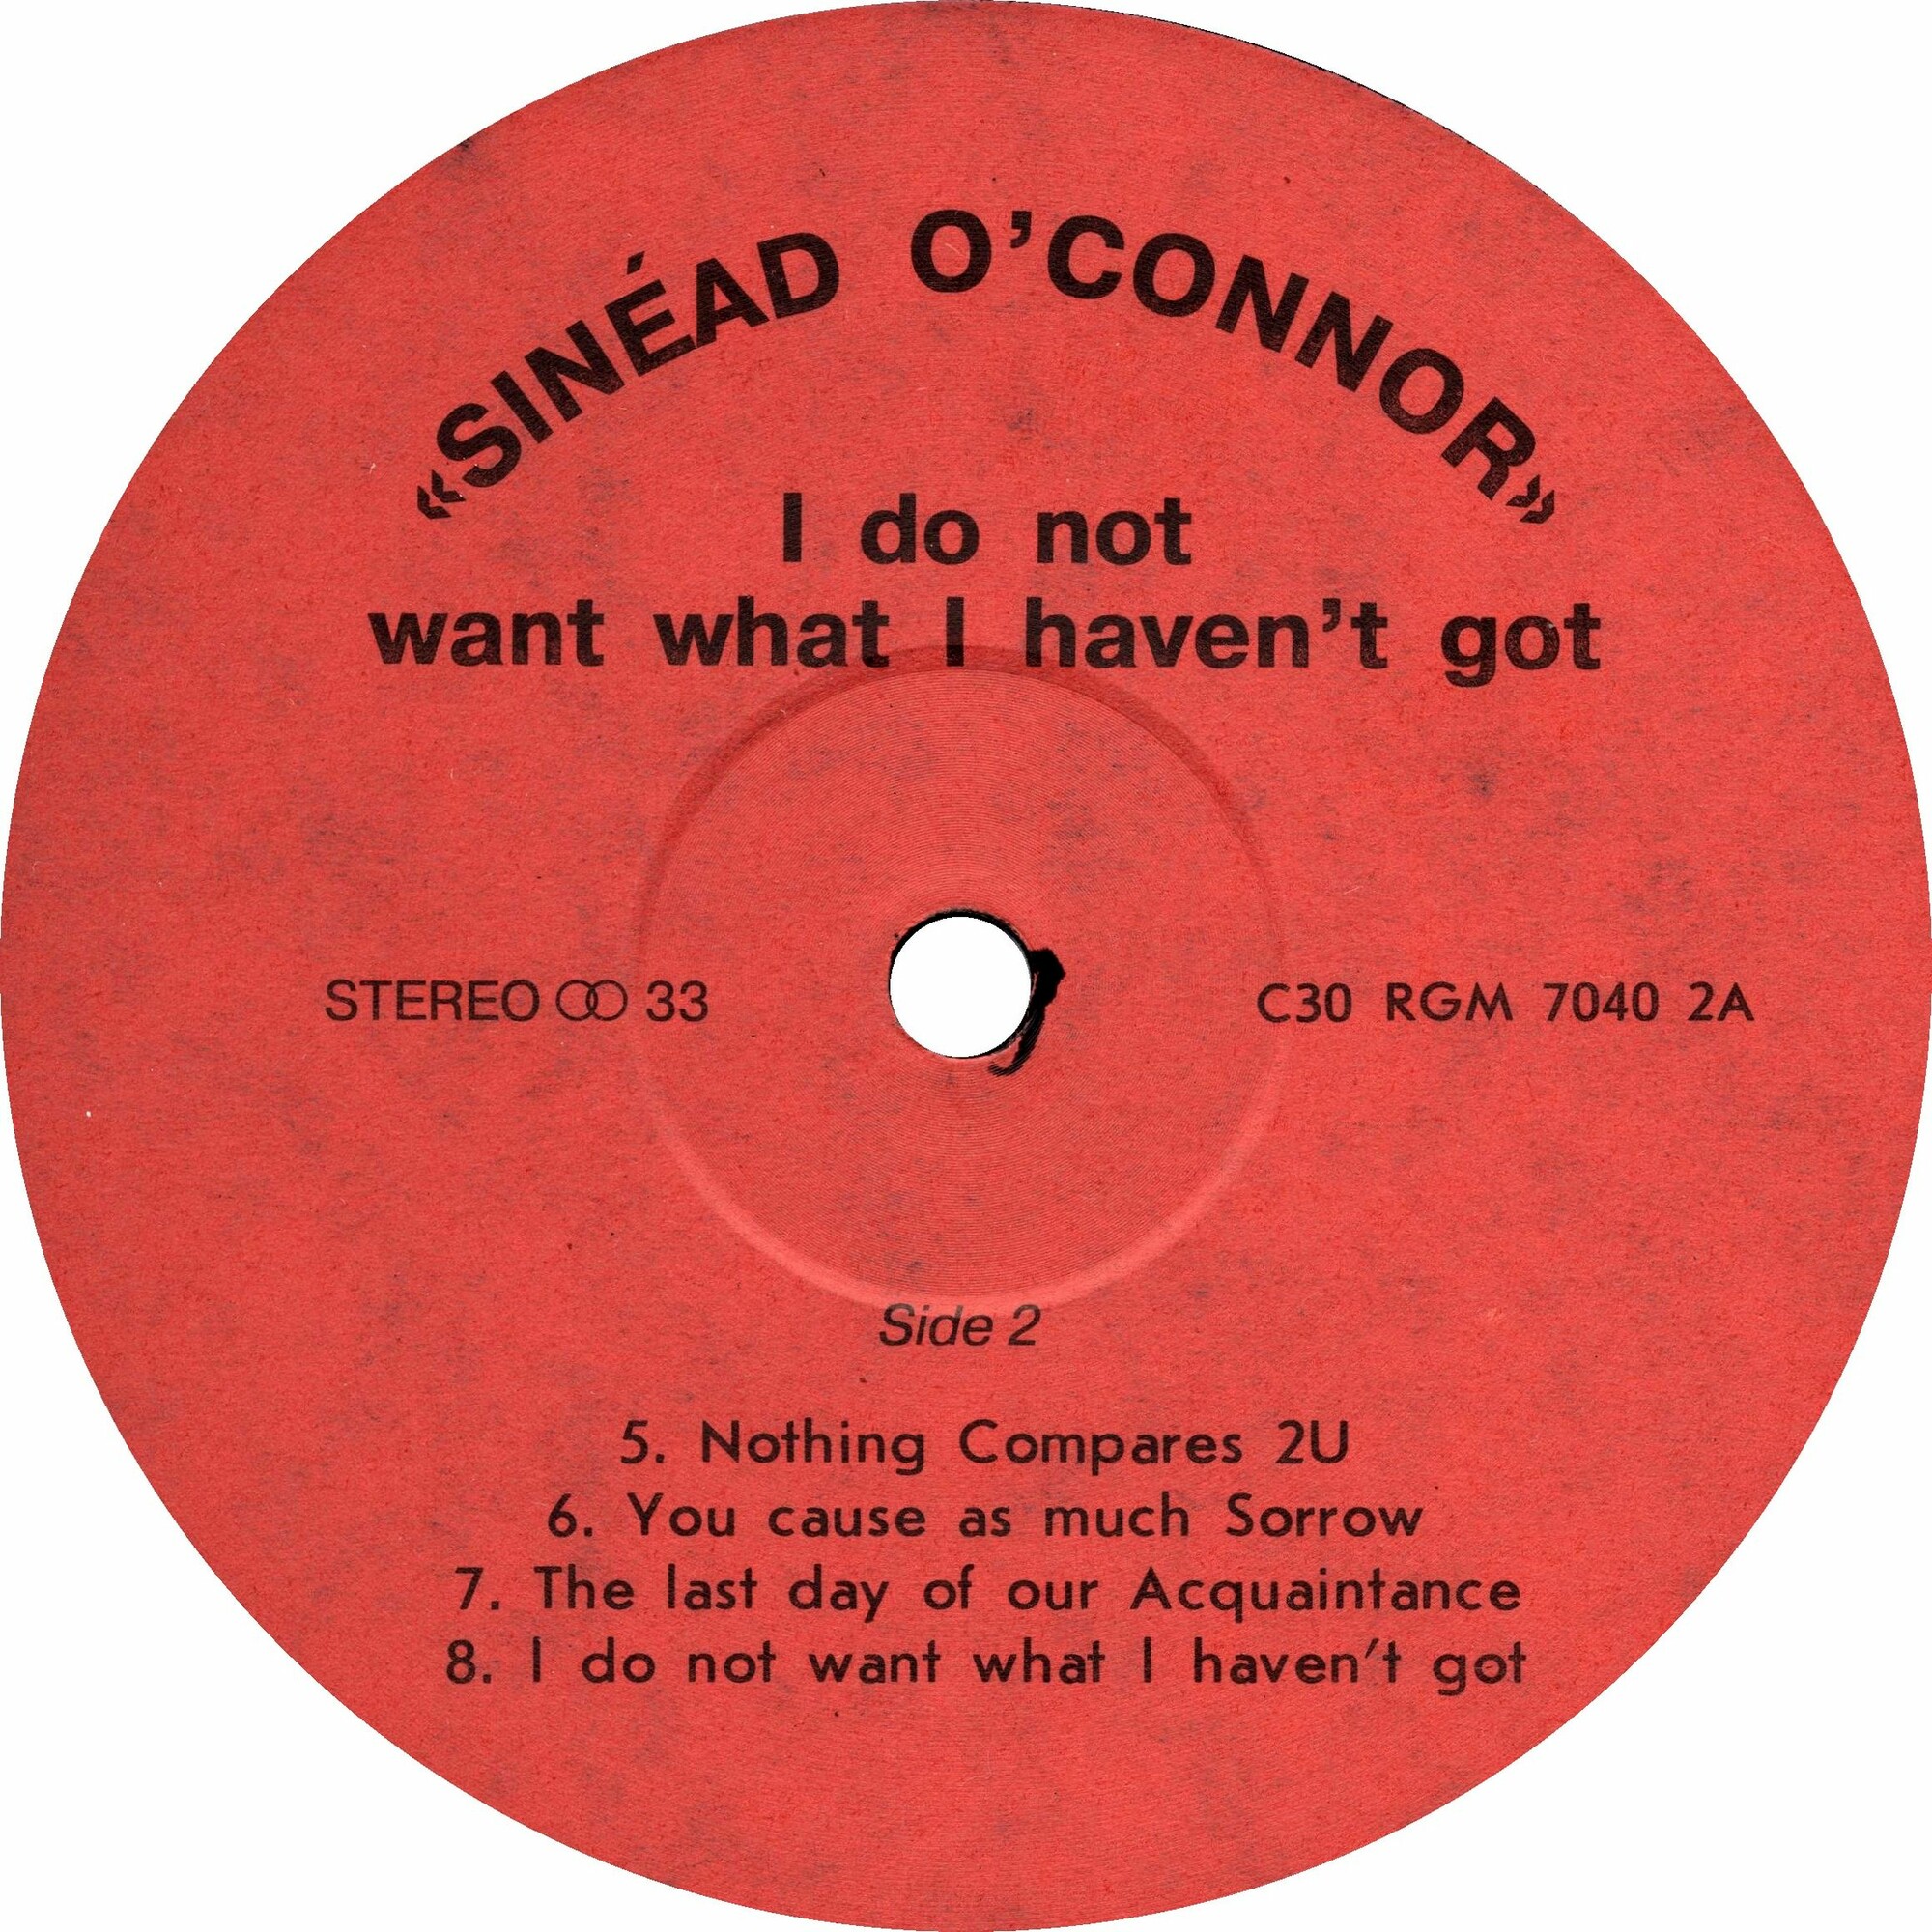 Sinead O’CONNOR. I do not want what I haven’t got